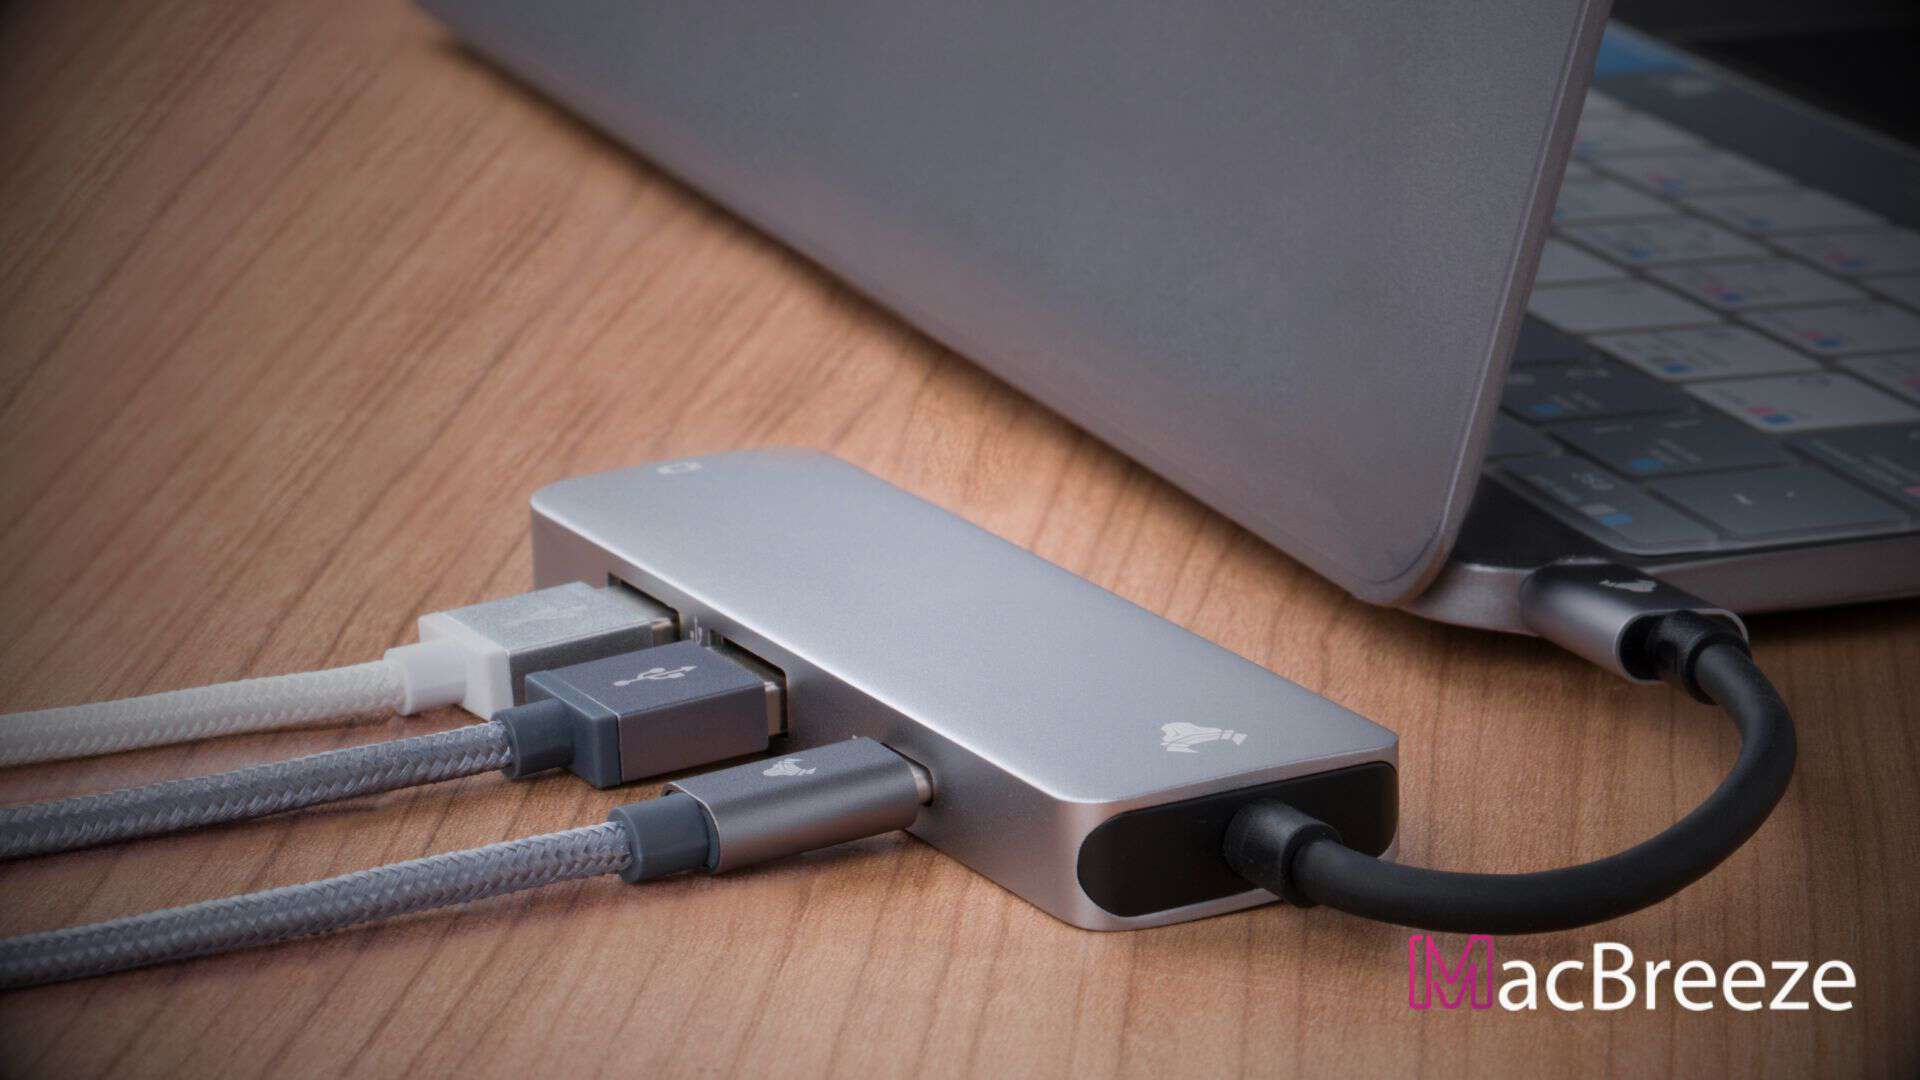 should you charge macbook through usb c hub or not